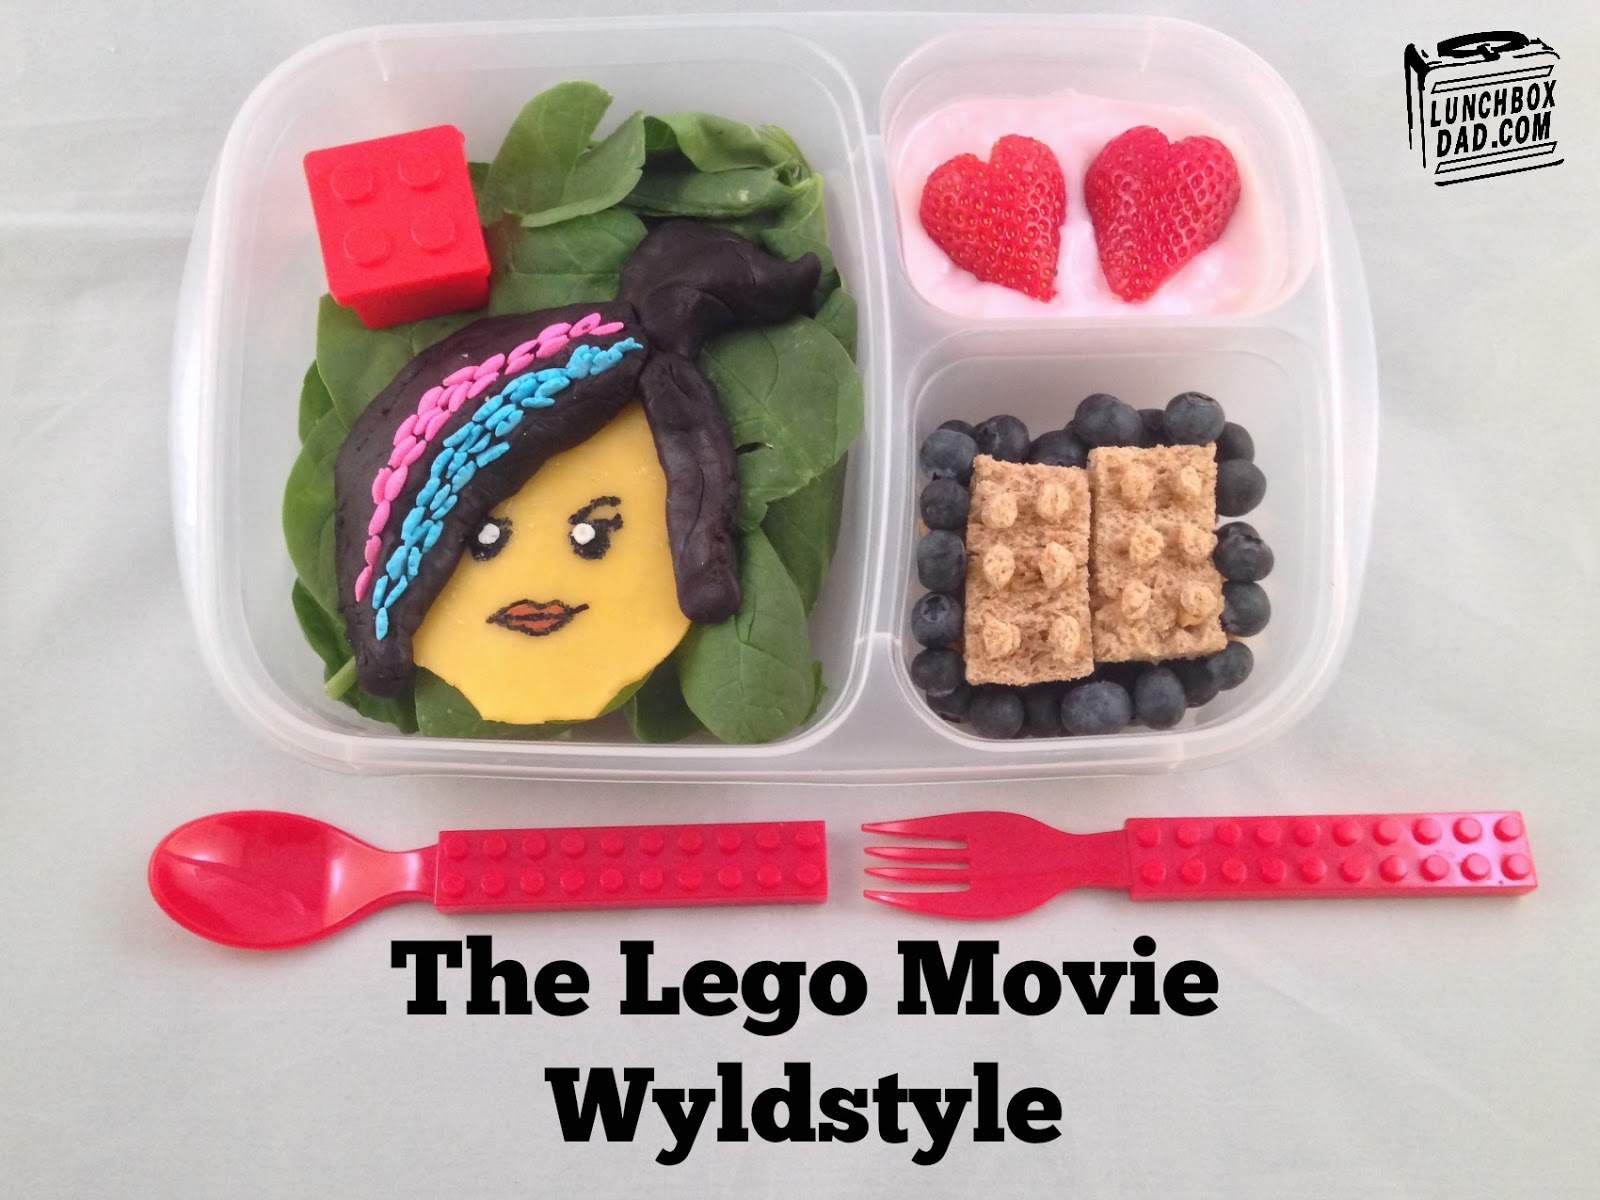 The Lego Movie Wyldstyle lunch